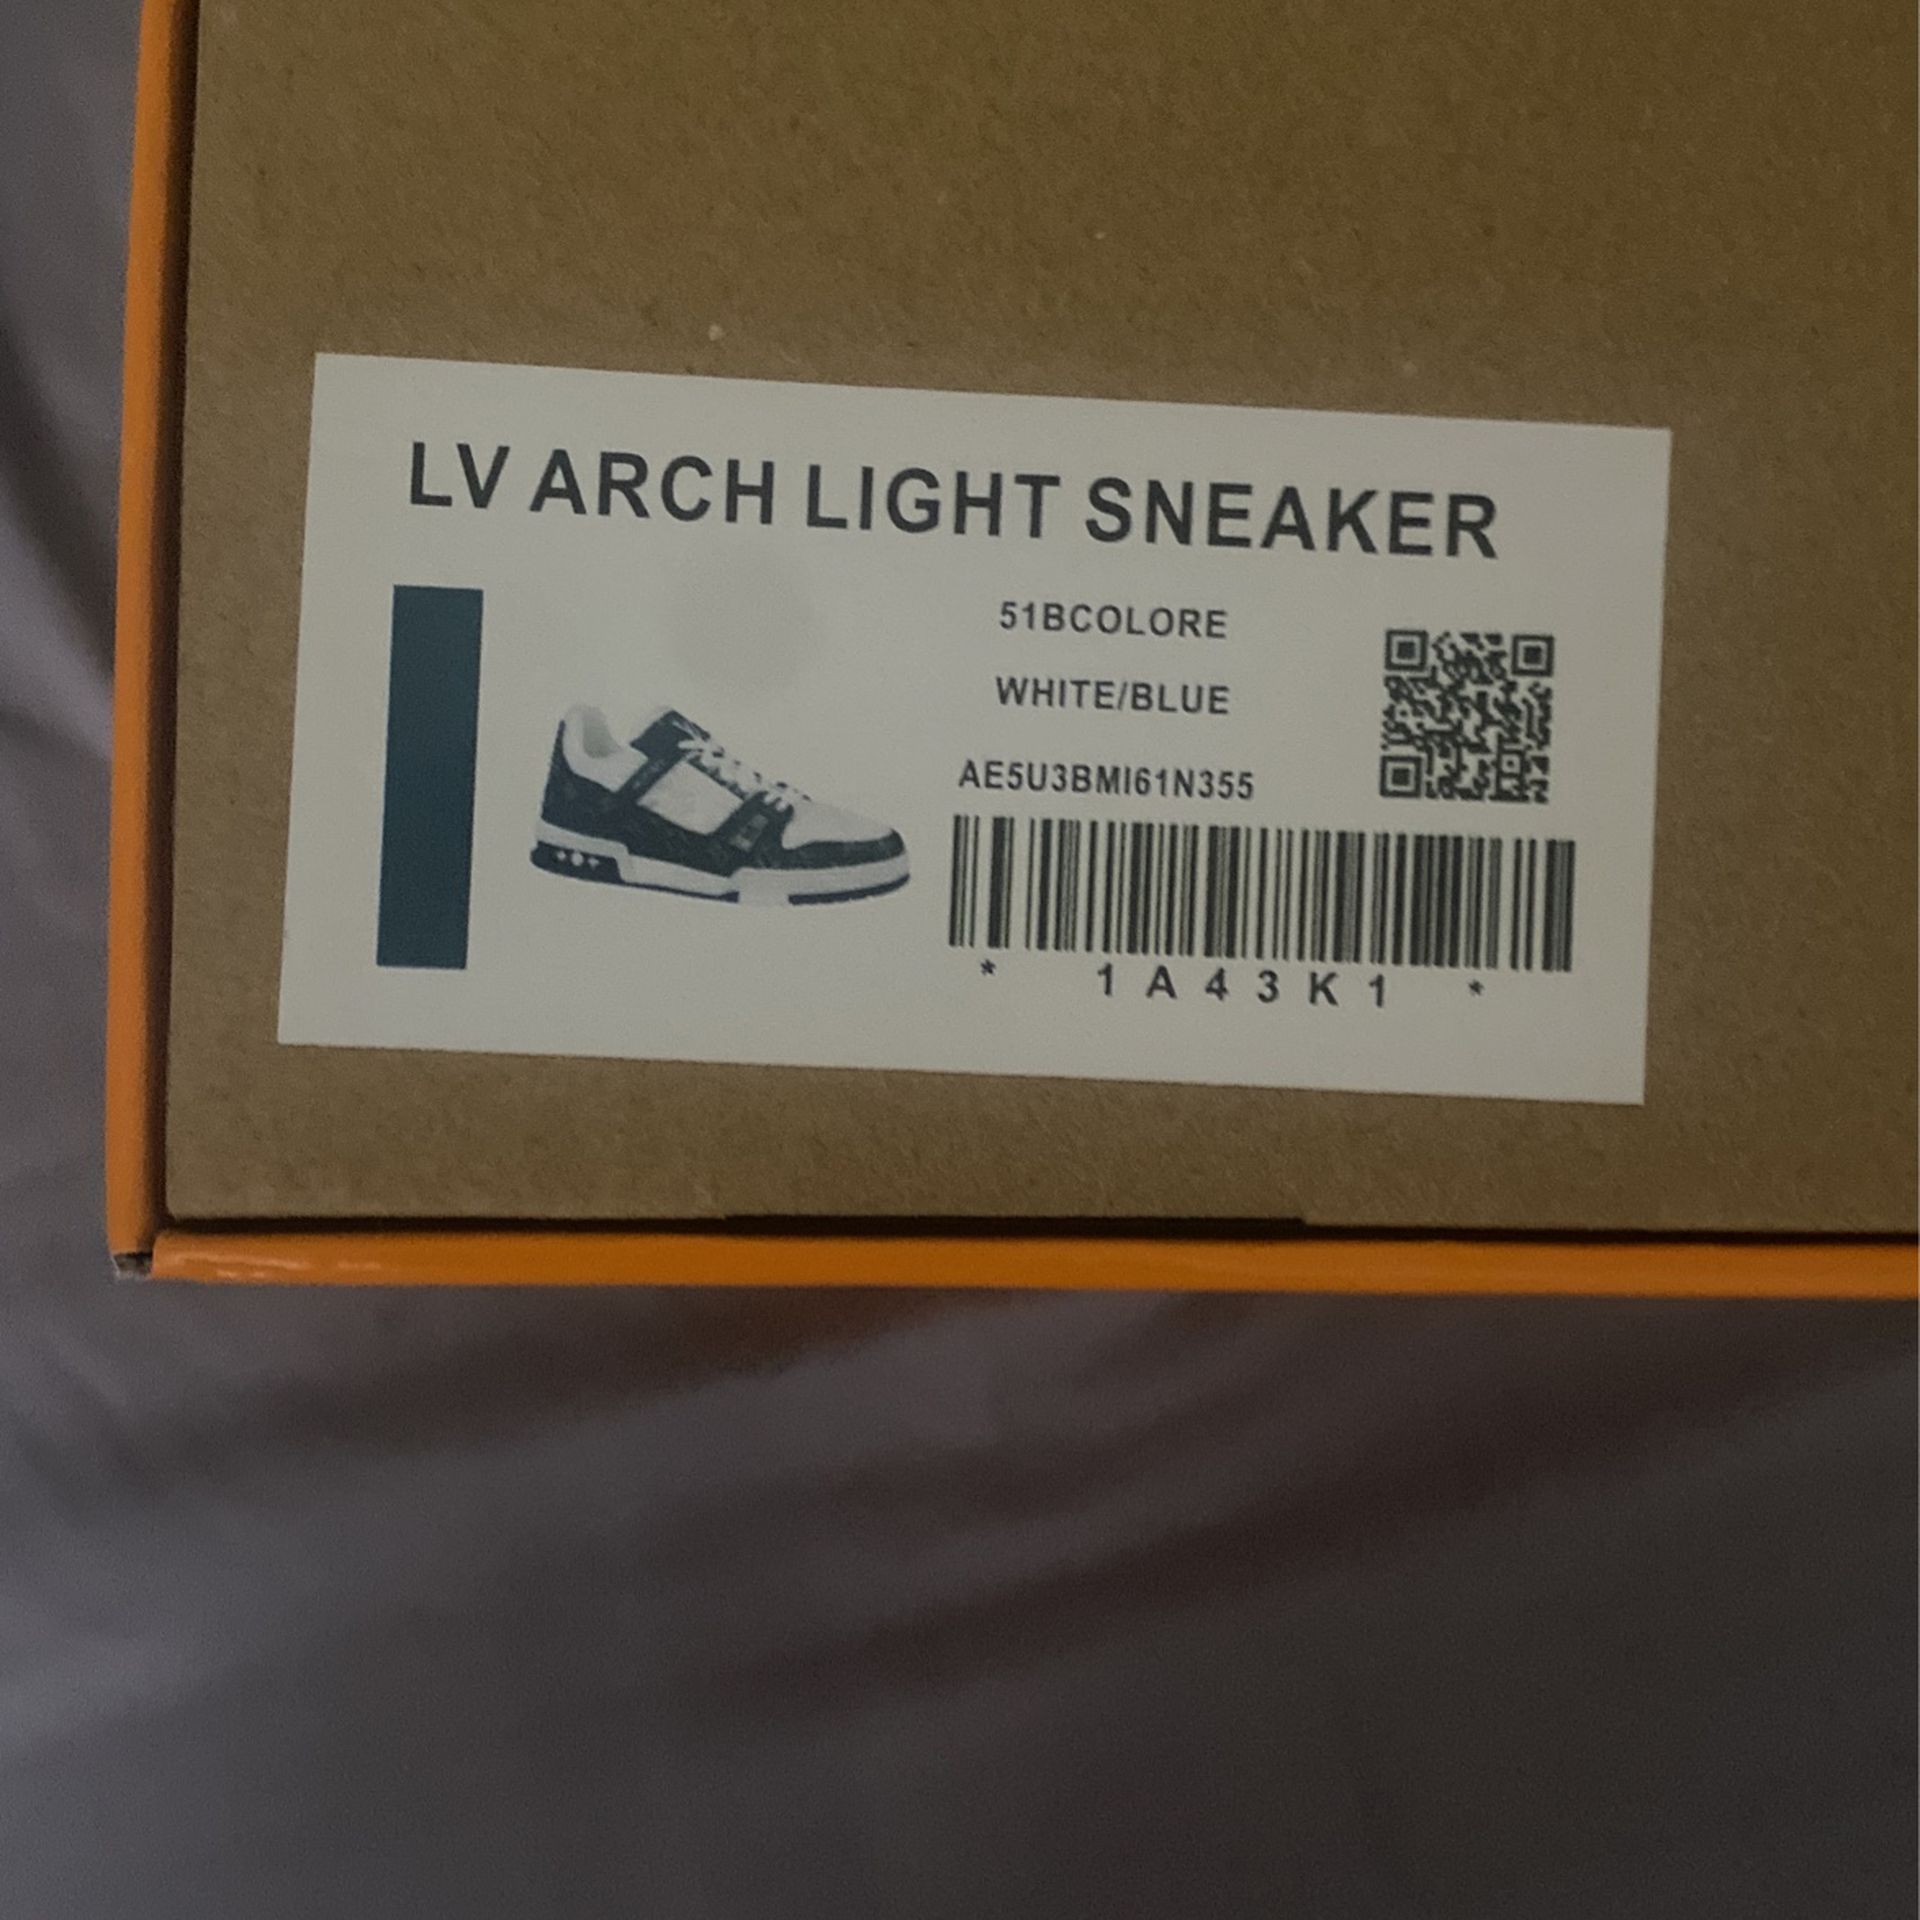 Louis Vuitton Shoes Sneaker Size 7us for Sale in Miami, FL - OfferUp